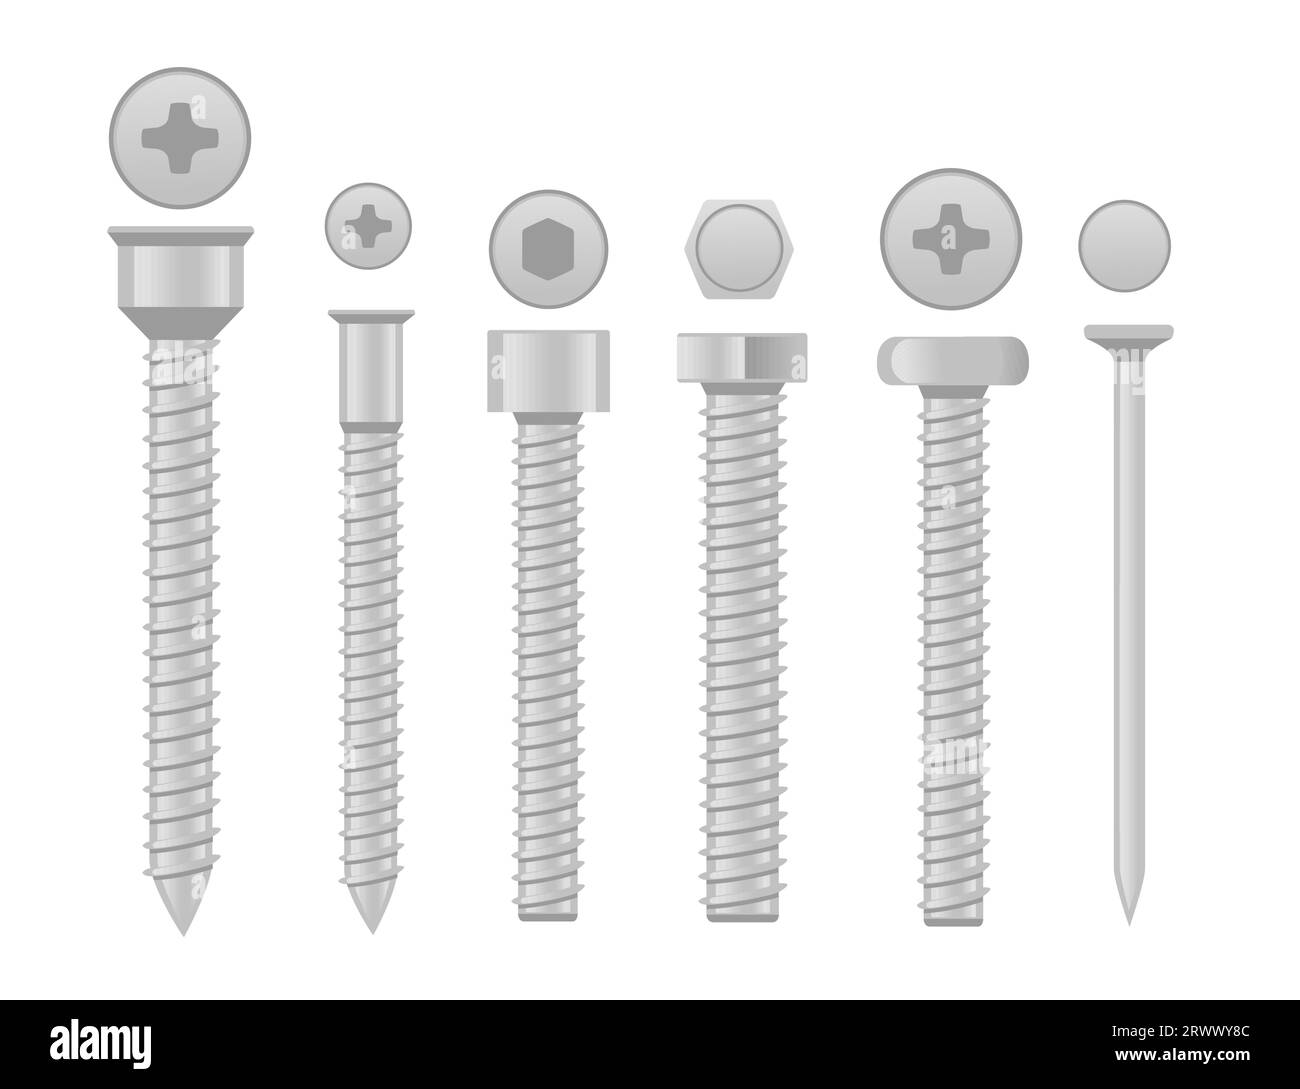 Collection of different types of screw vector illustration isolated on white background Stock Vector